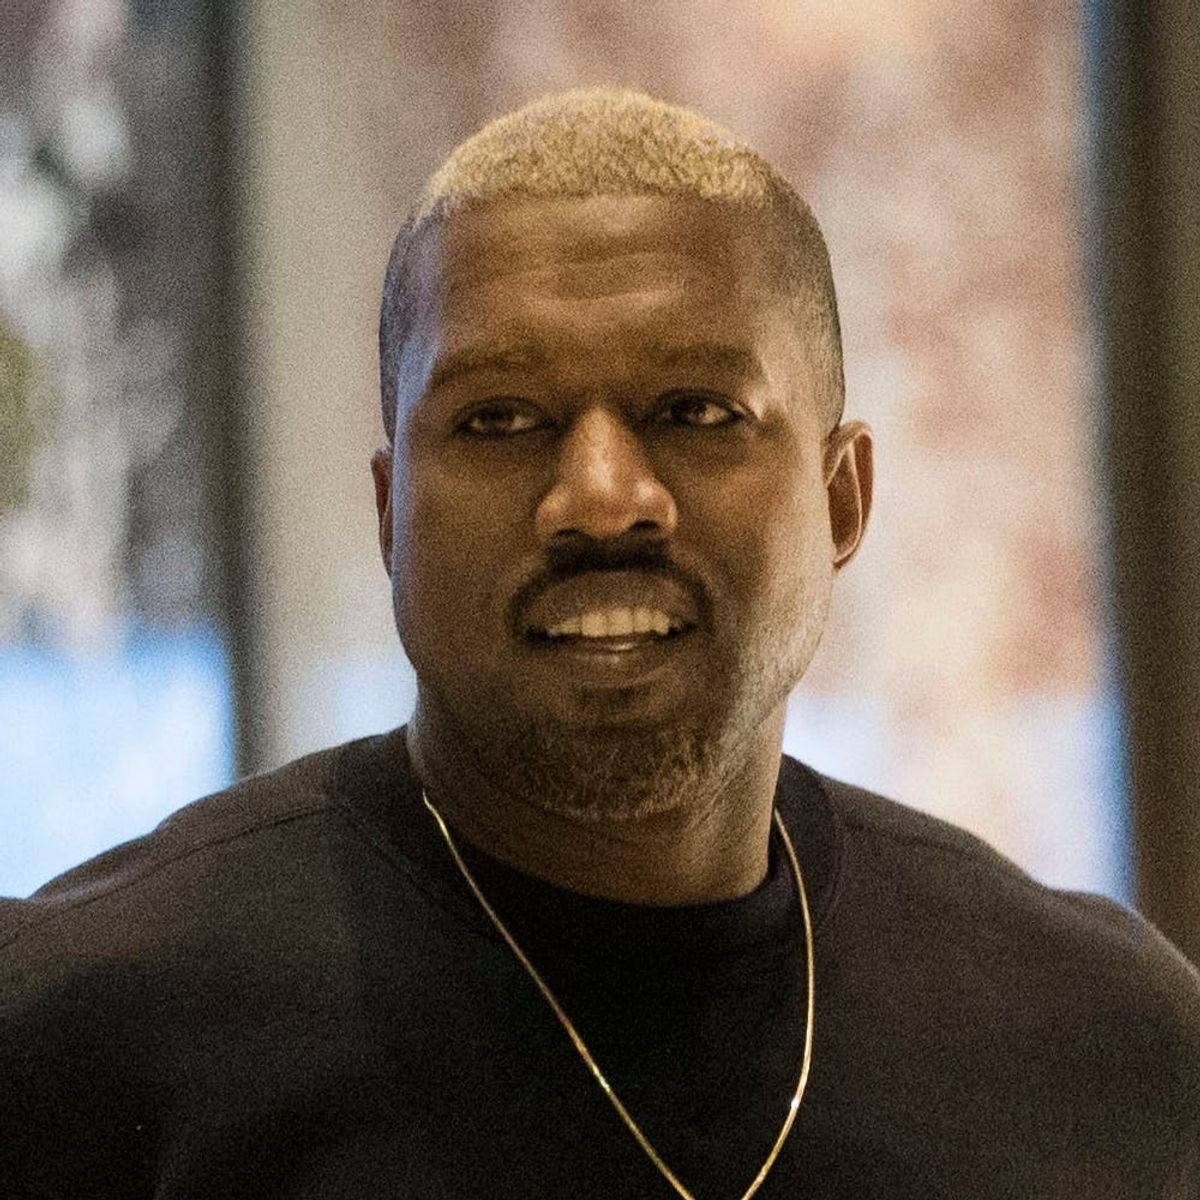 Kanye West Just Deleted His Twitter and Instagram Accounts